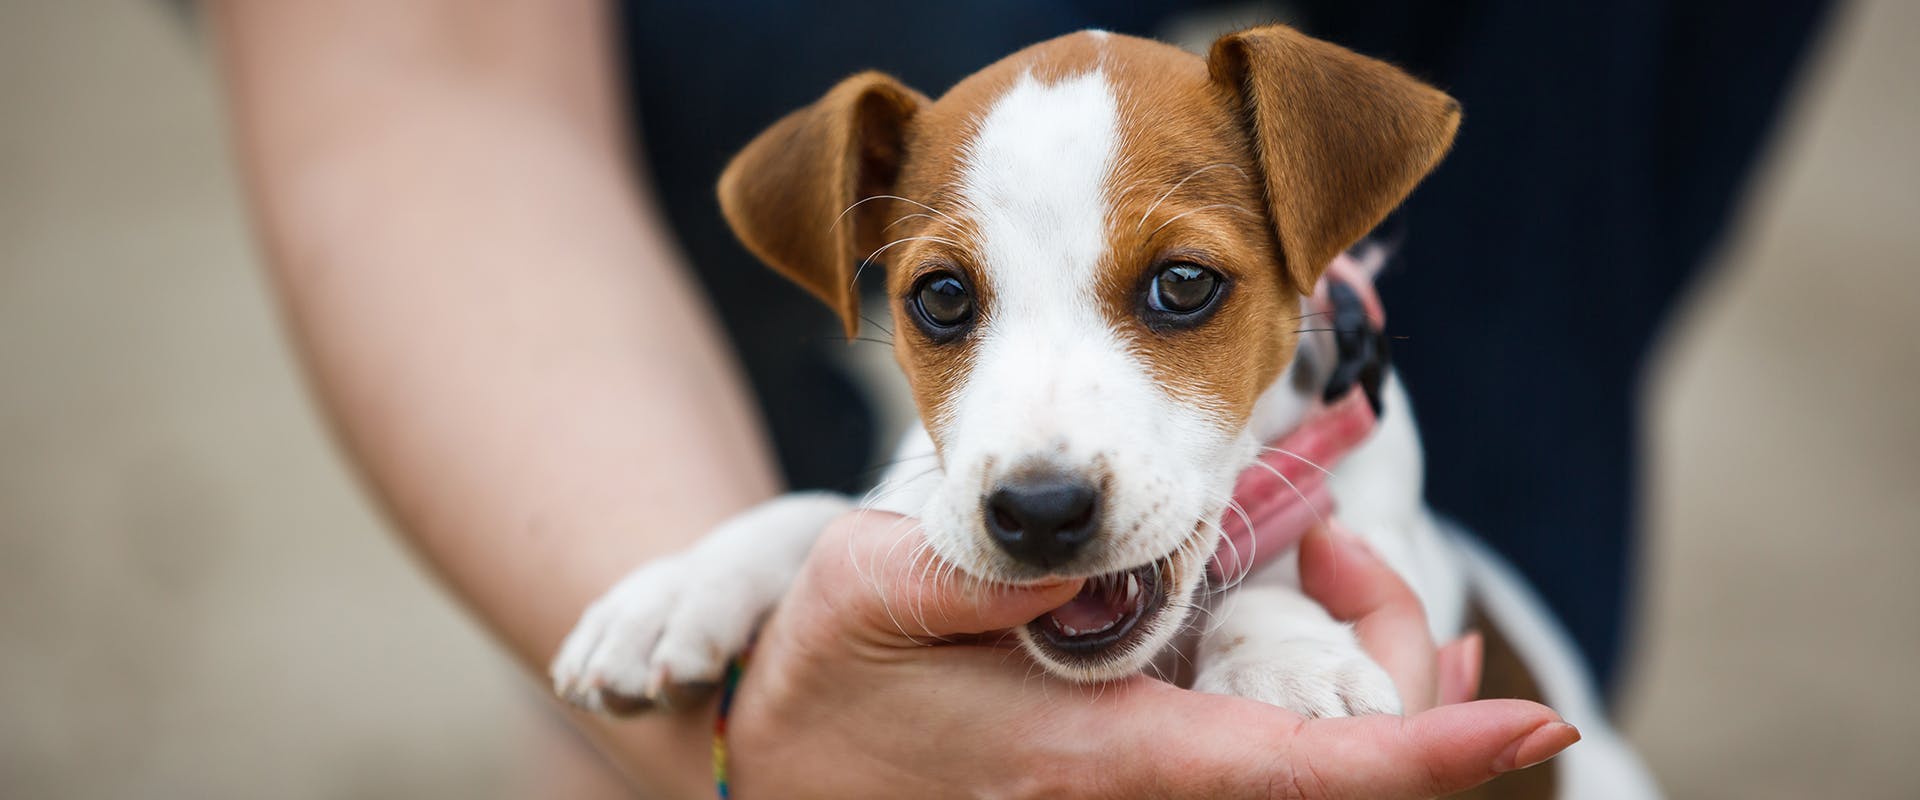 A cute Jack Russell puppy, playfully nipping a person's thumb